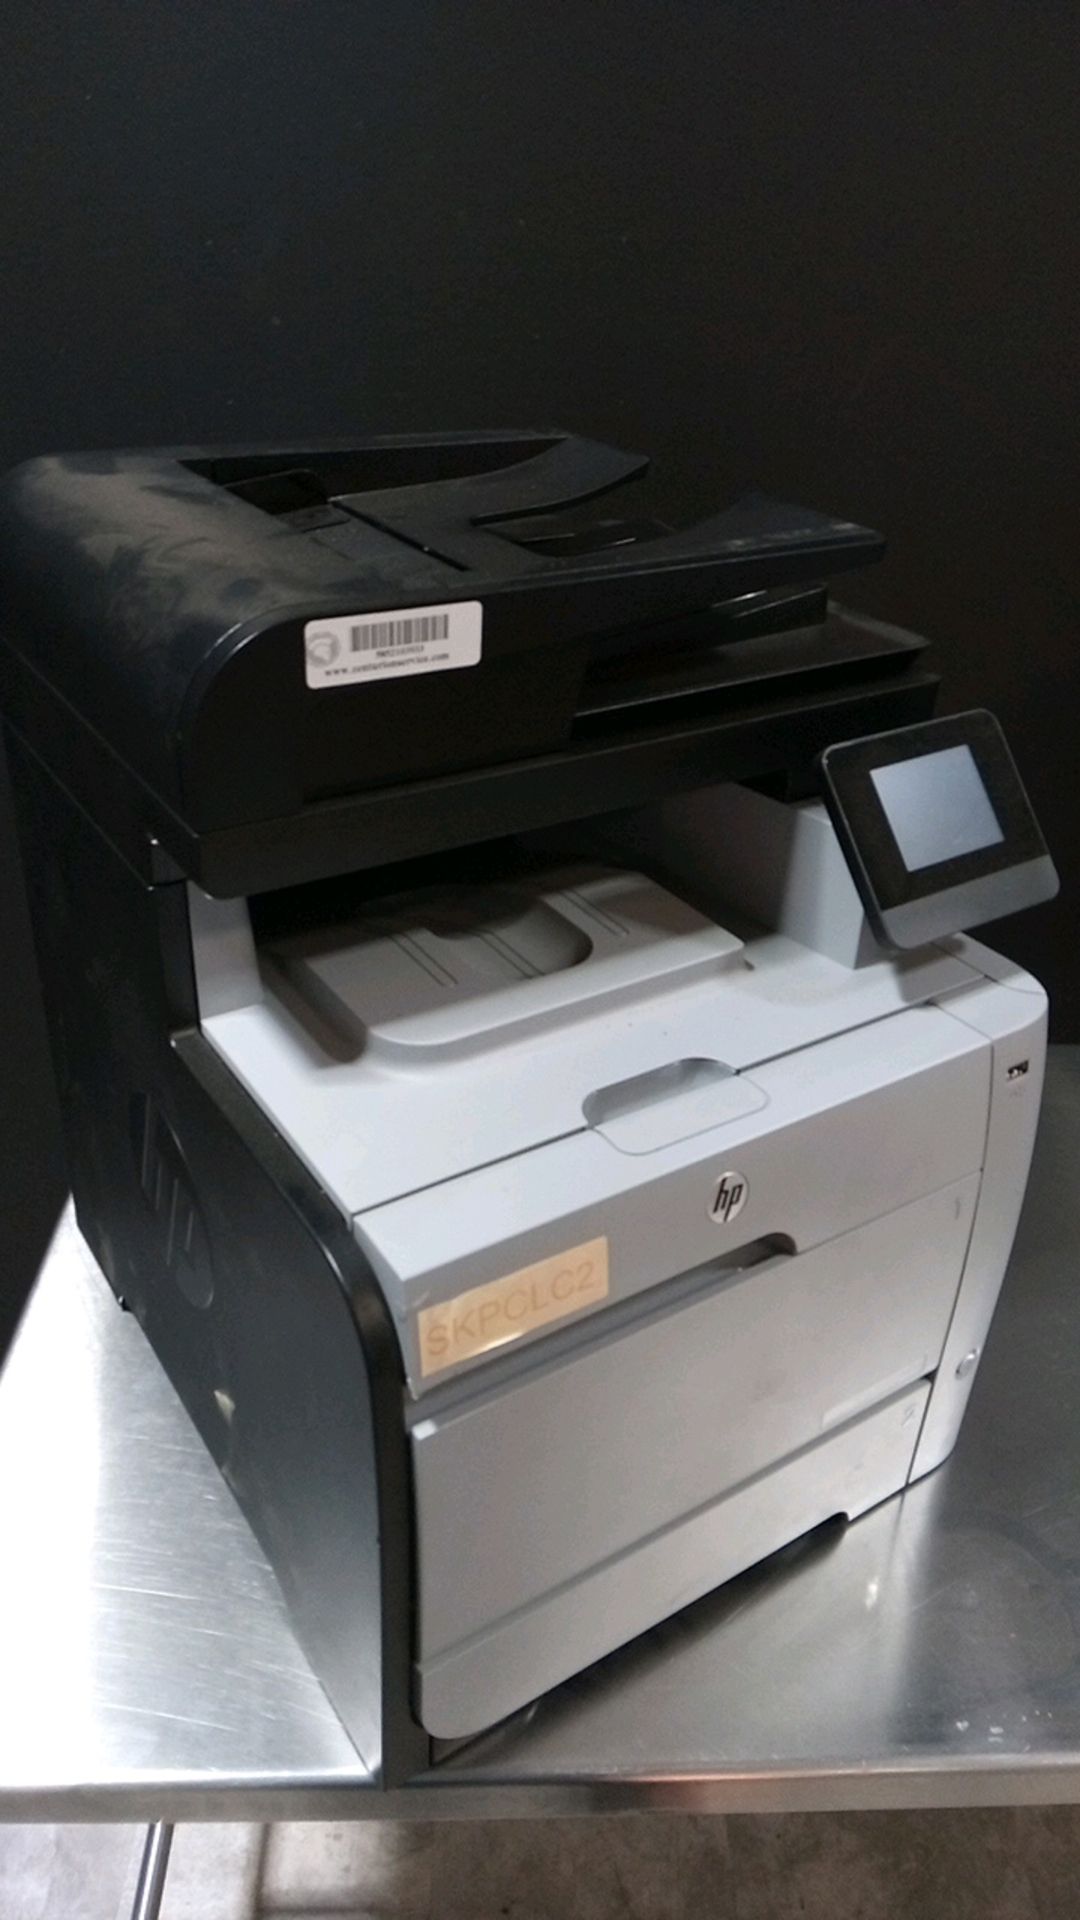 HP M476NW PRINTER LOCATED AT: 2440 GREENLEAF AVE, ELK GROVE VILLAGE IL